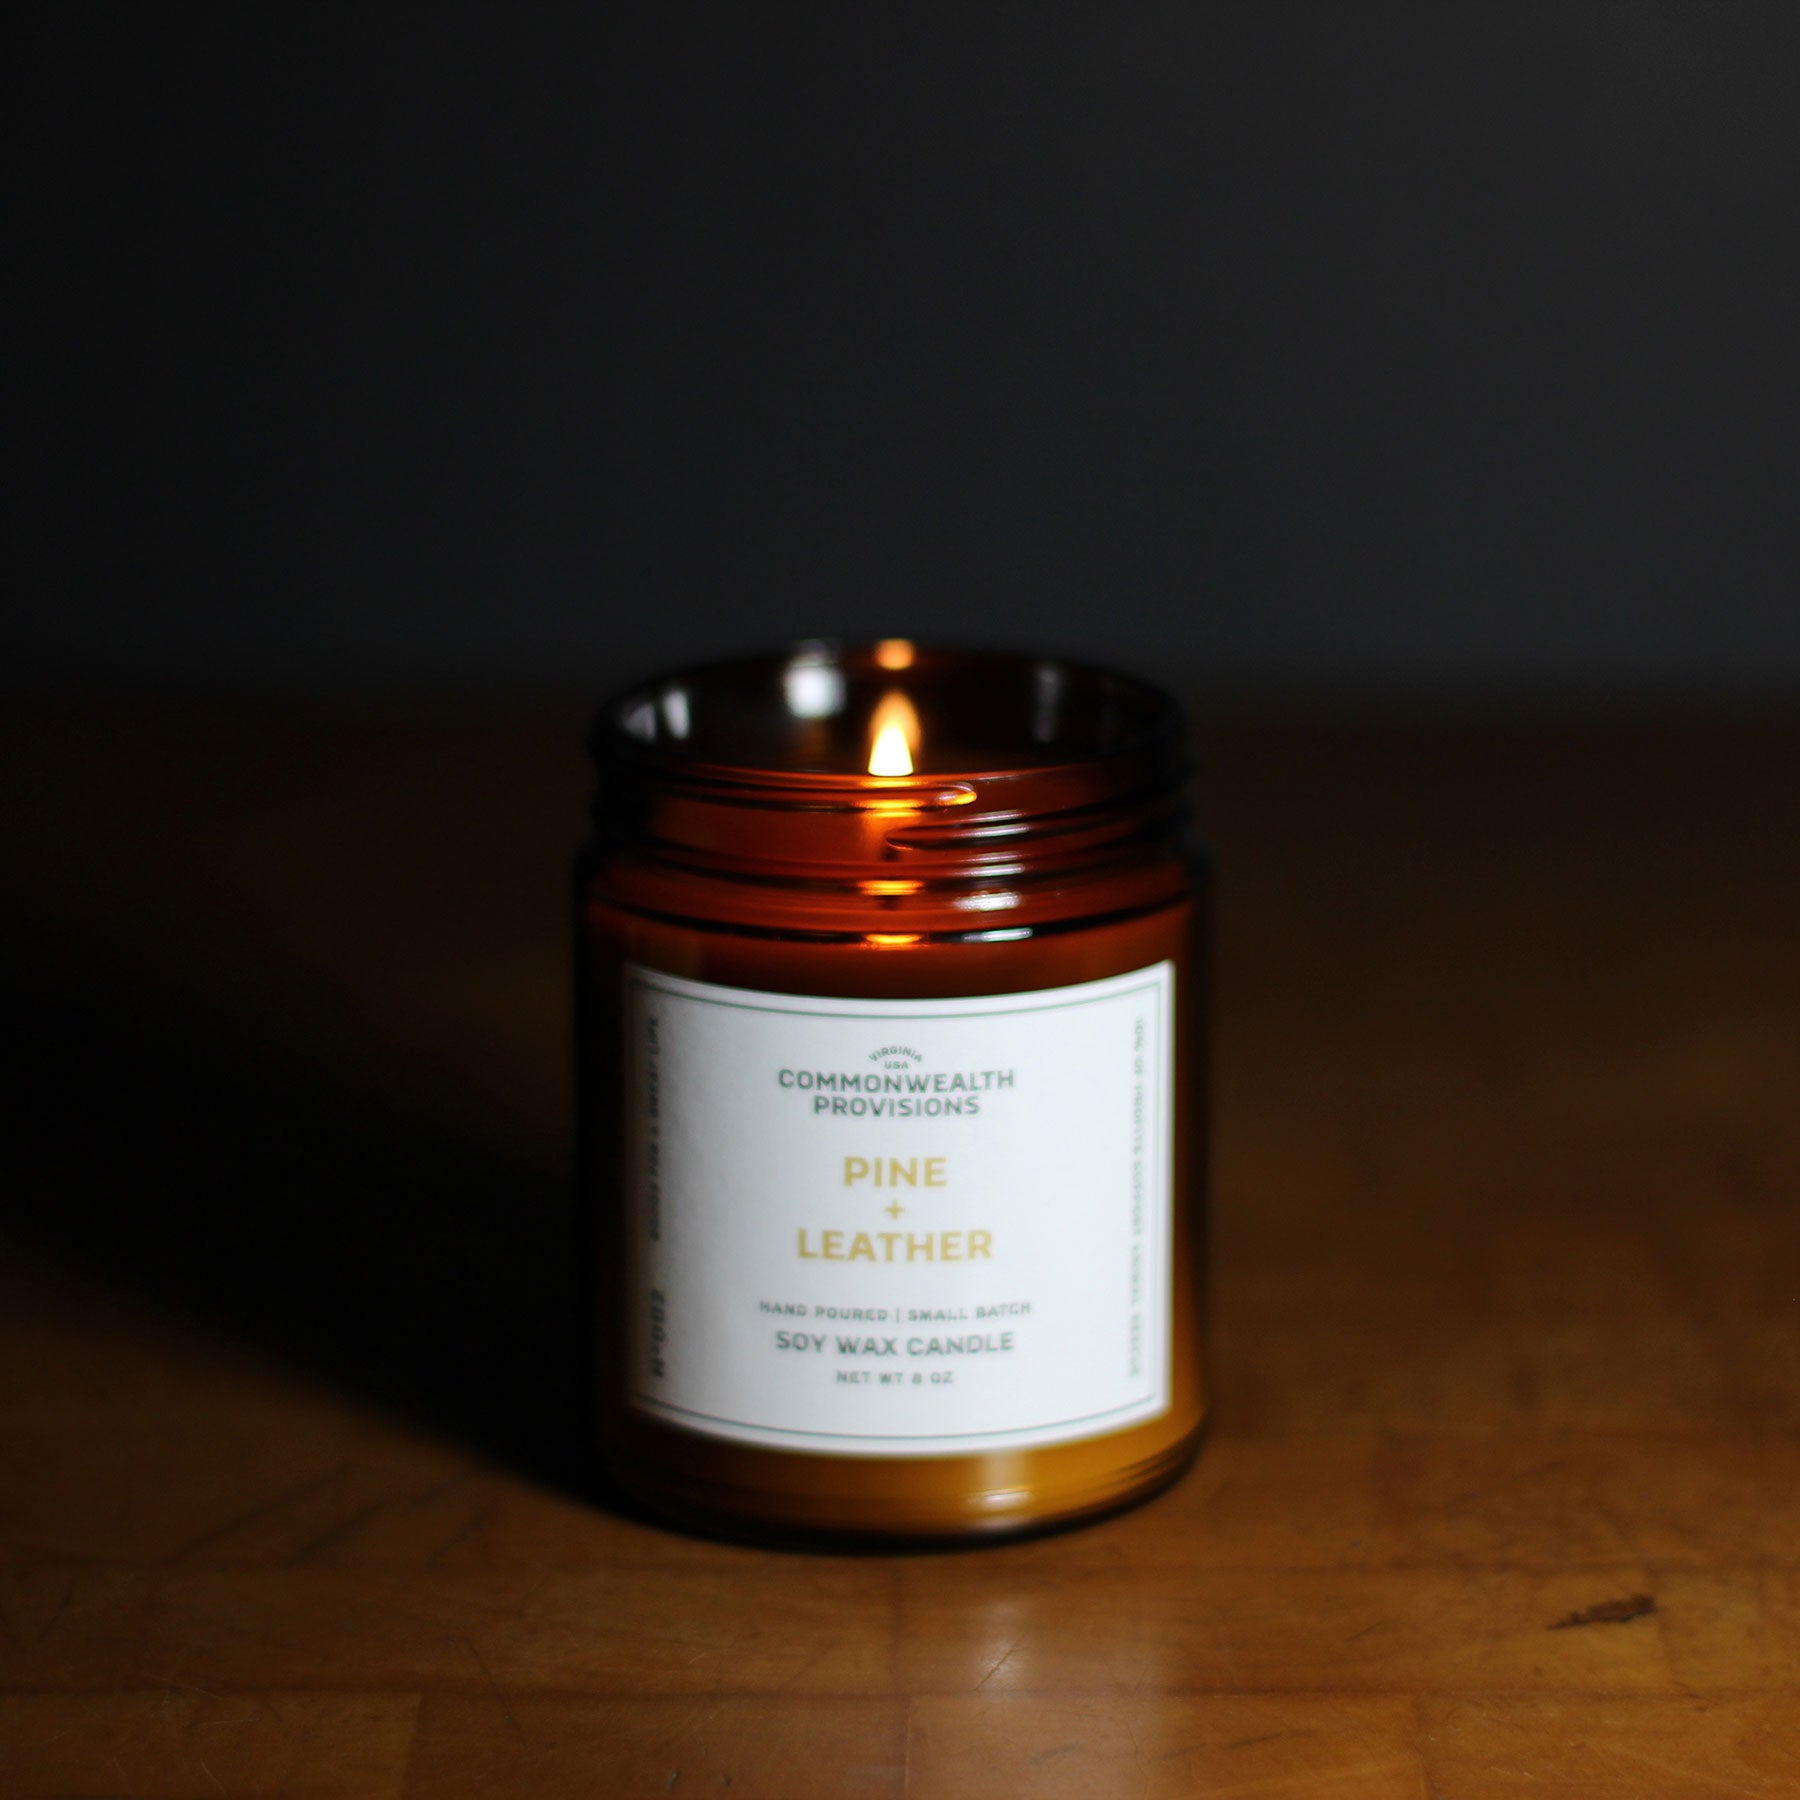 Pine + Leather Candle